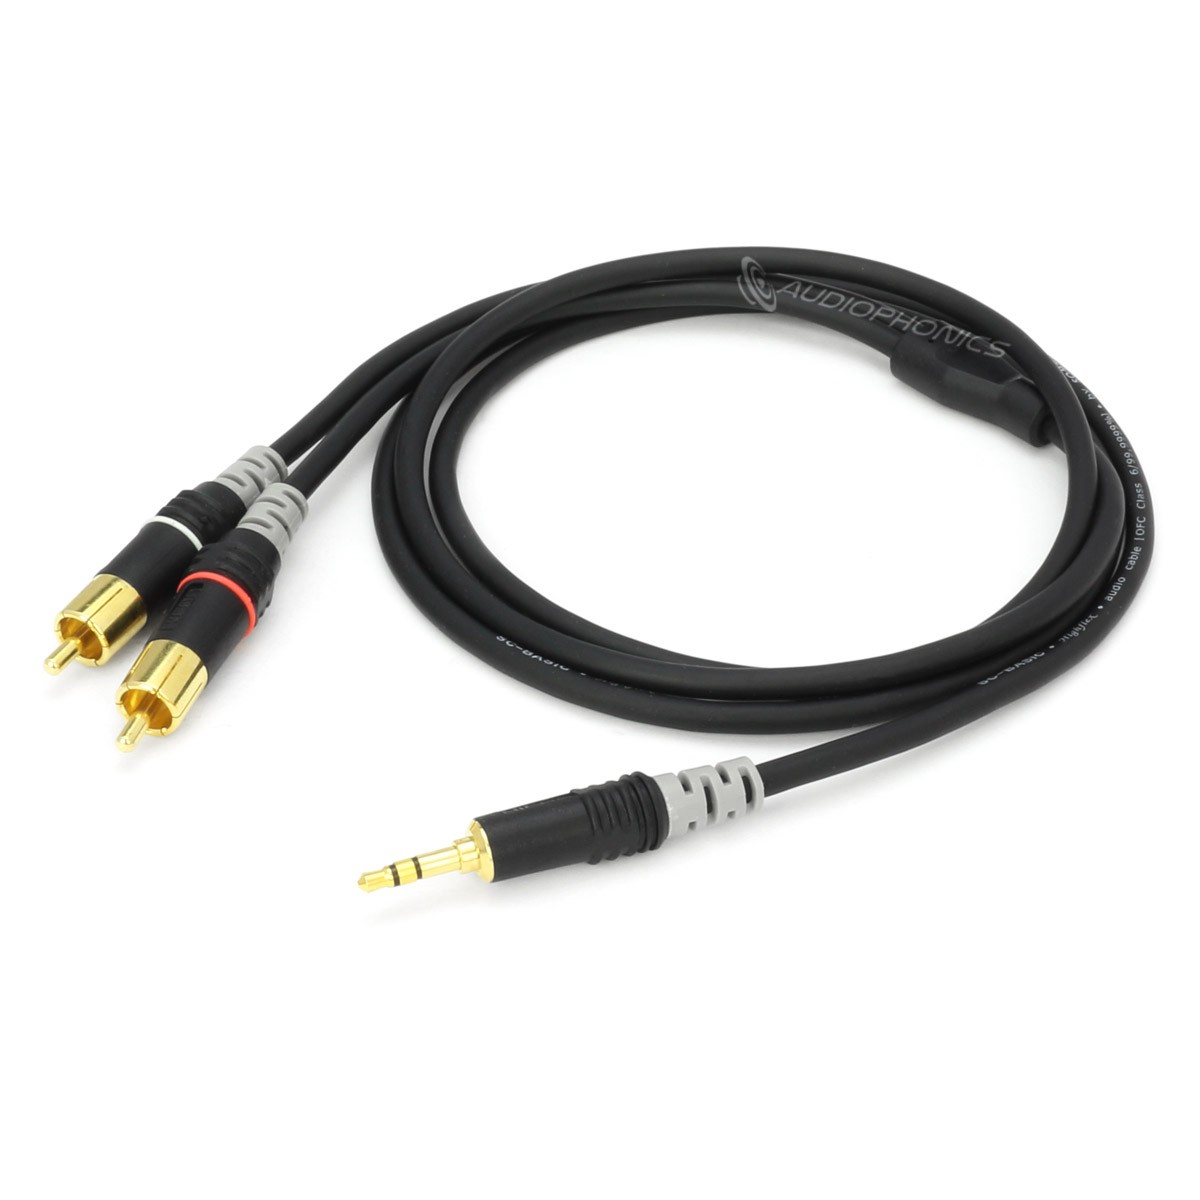 https://www.audiophonics.fr/32950/sommercable-hba-3sc2-cable-rca-stereo-males-vers-jack-35mm-stereo-male-15m.jpg